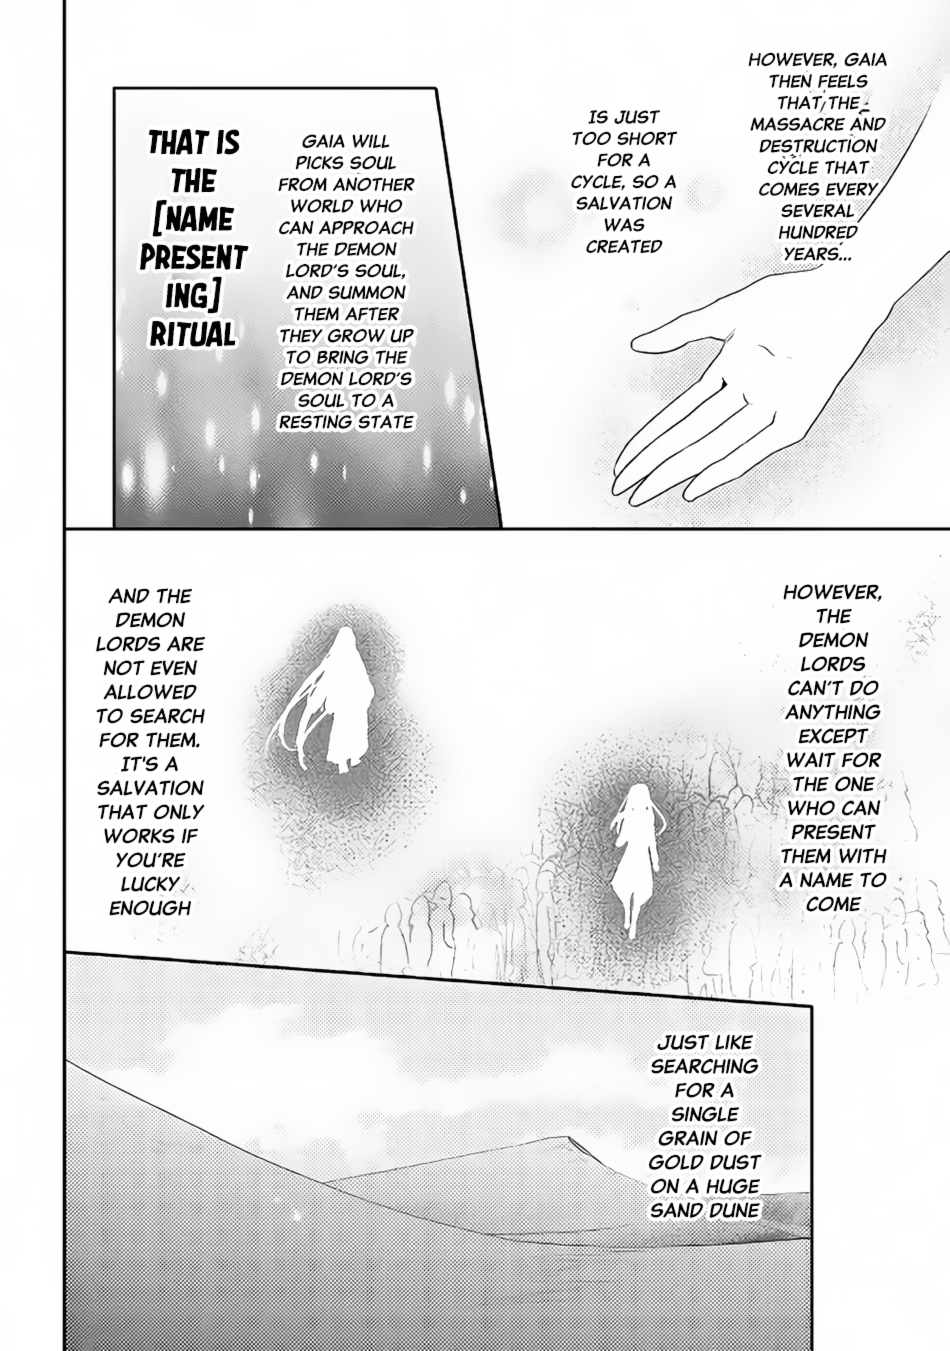 In Another World, I'm Called: the Black Healer Vol. 5 Ch. 31